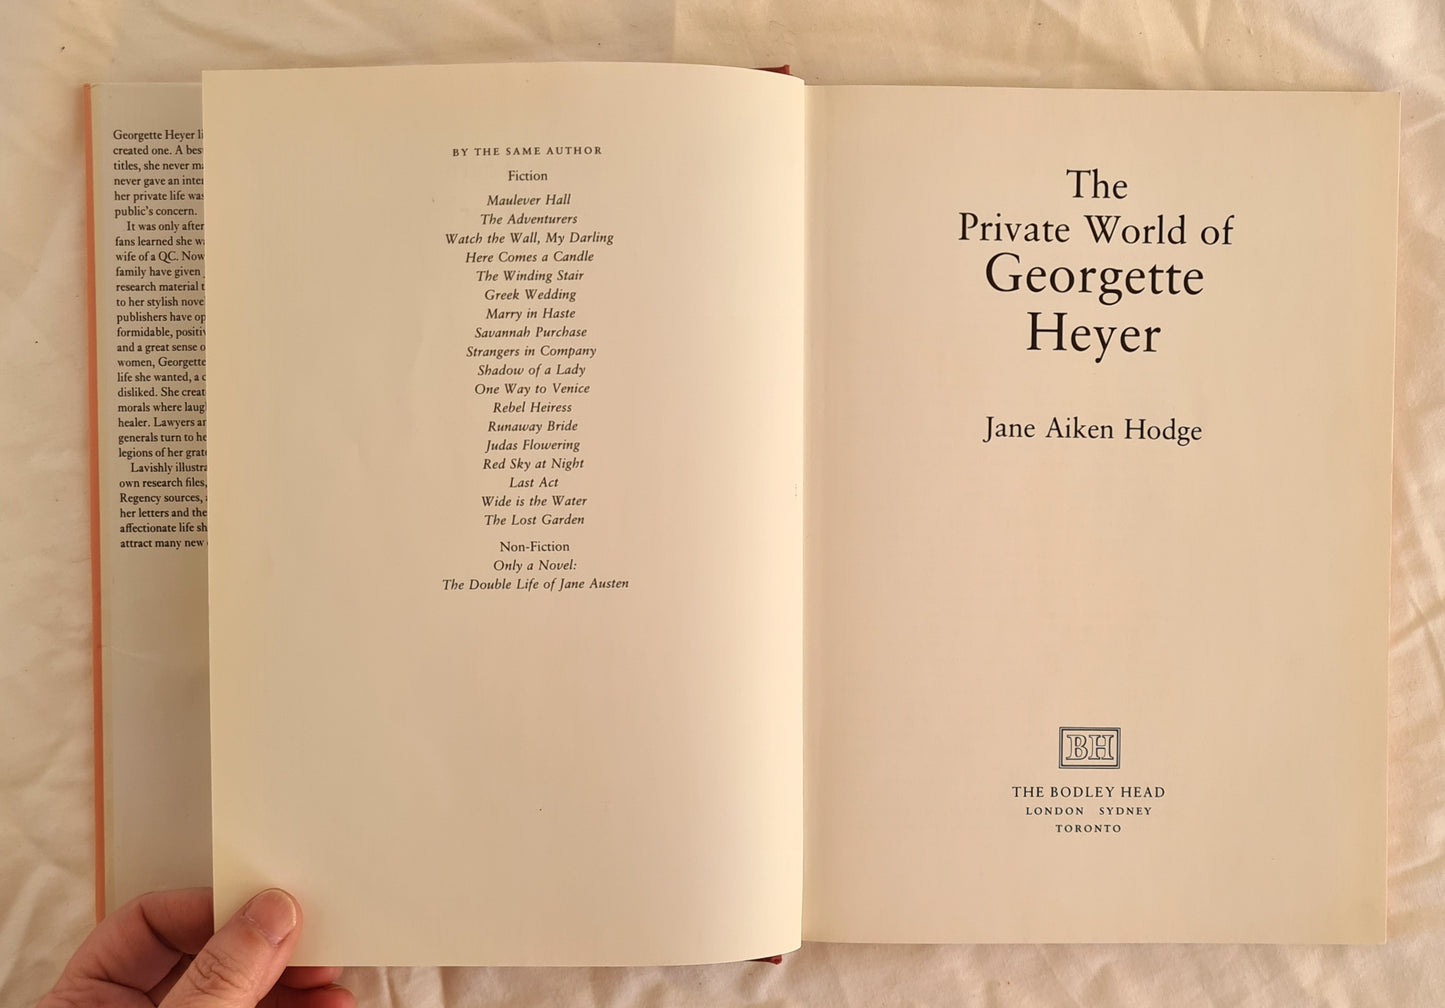 The Private World of Georgette Heyer by Jane Aiken Hodge